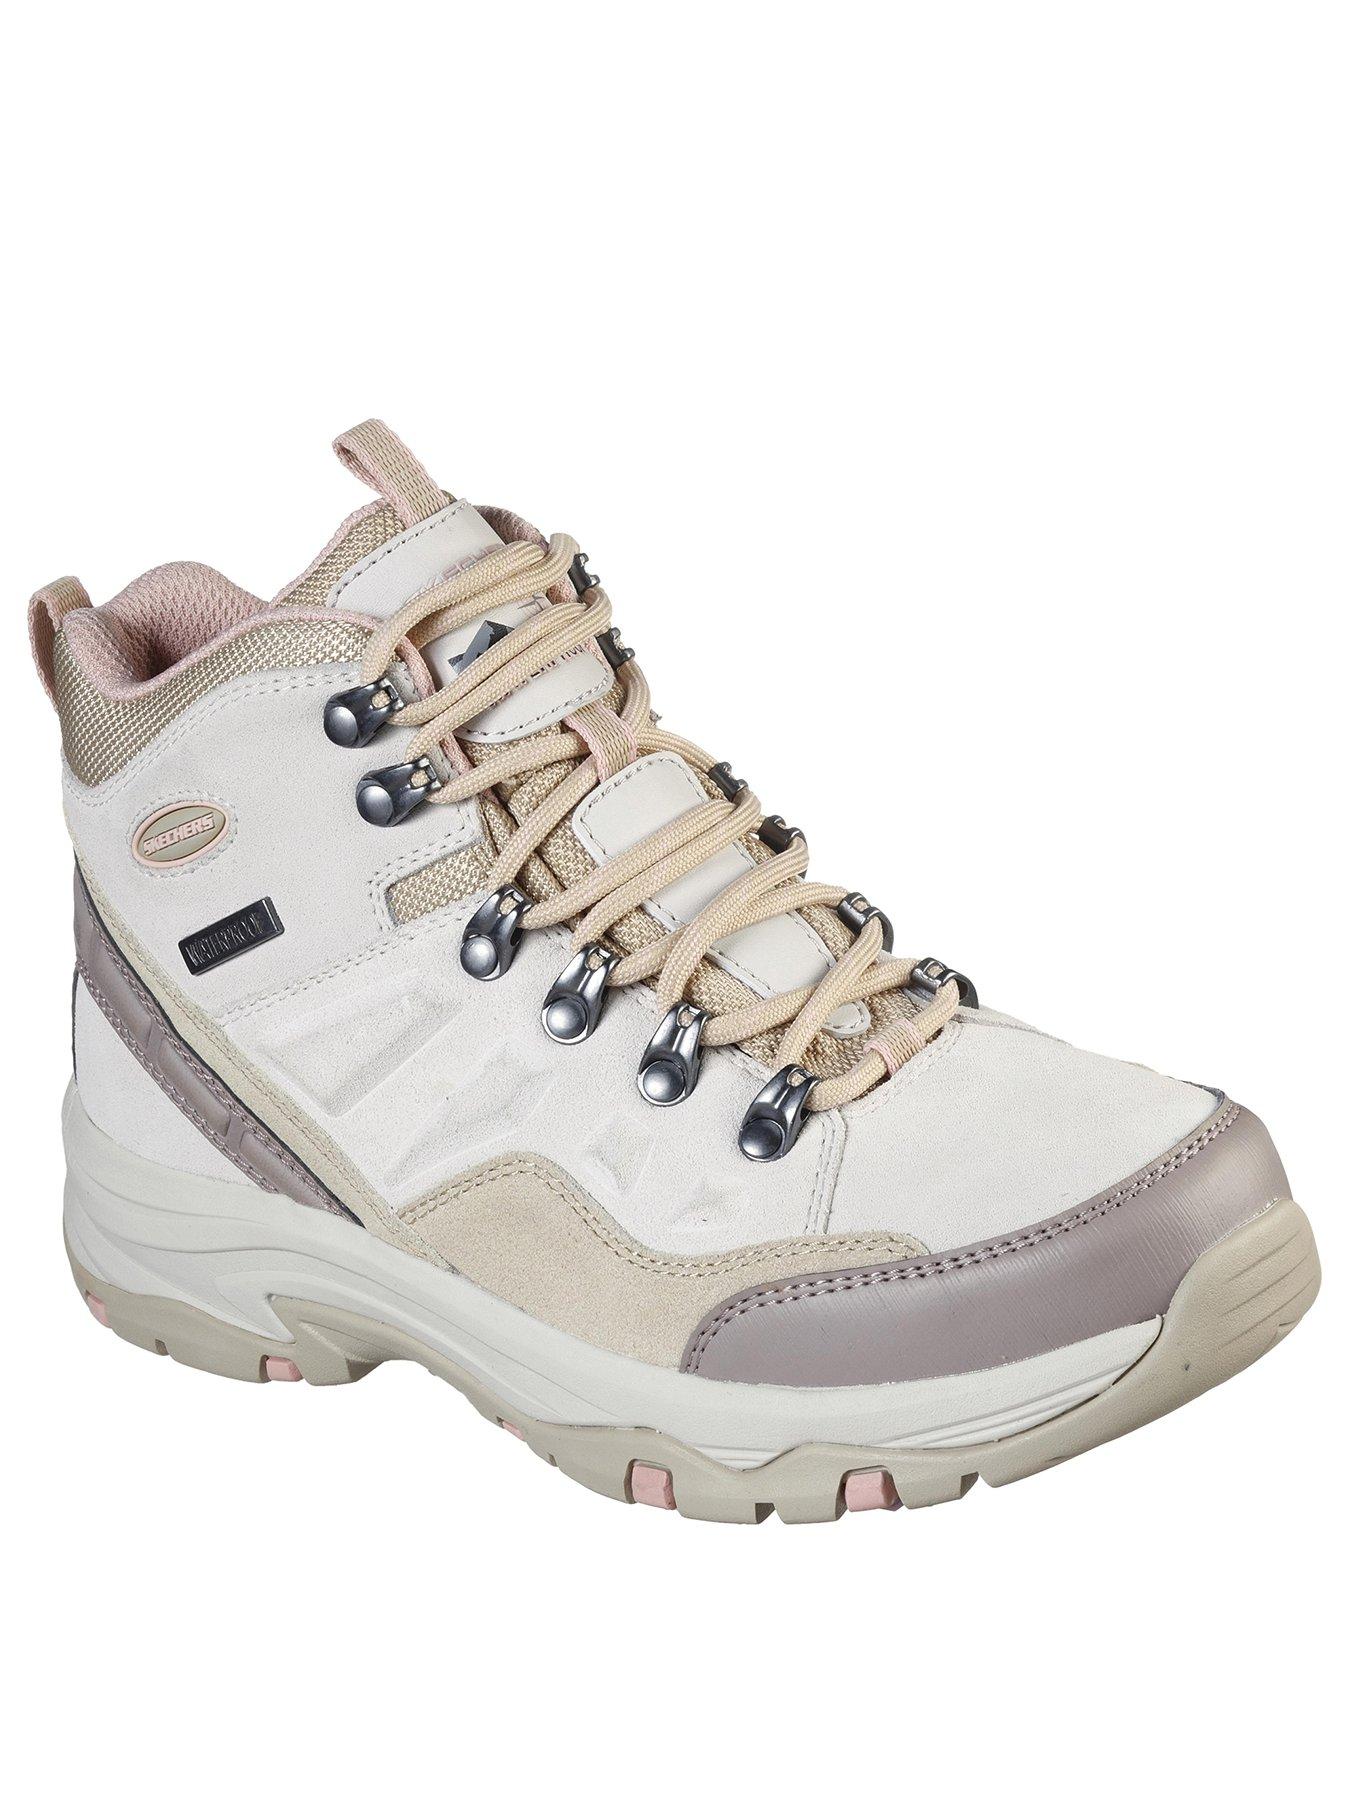 skechers lace up walking shoes